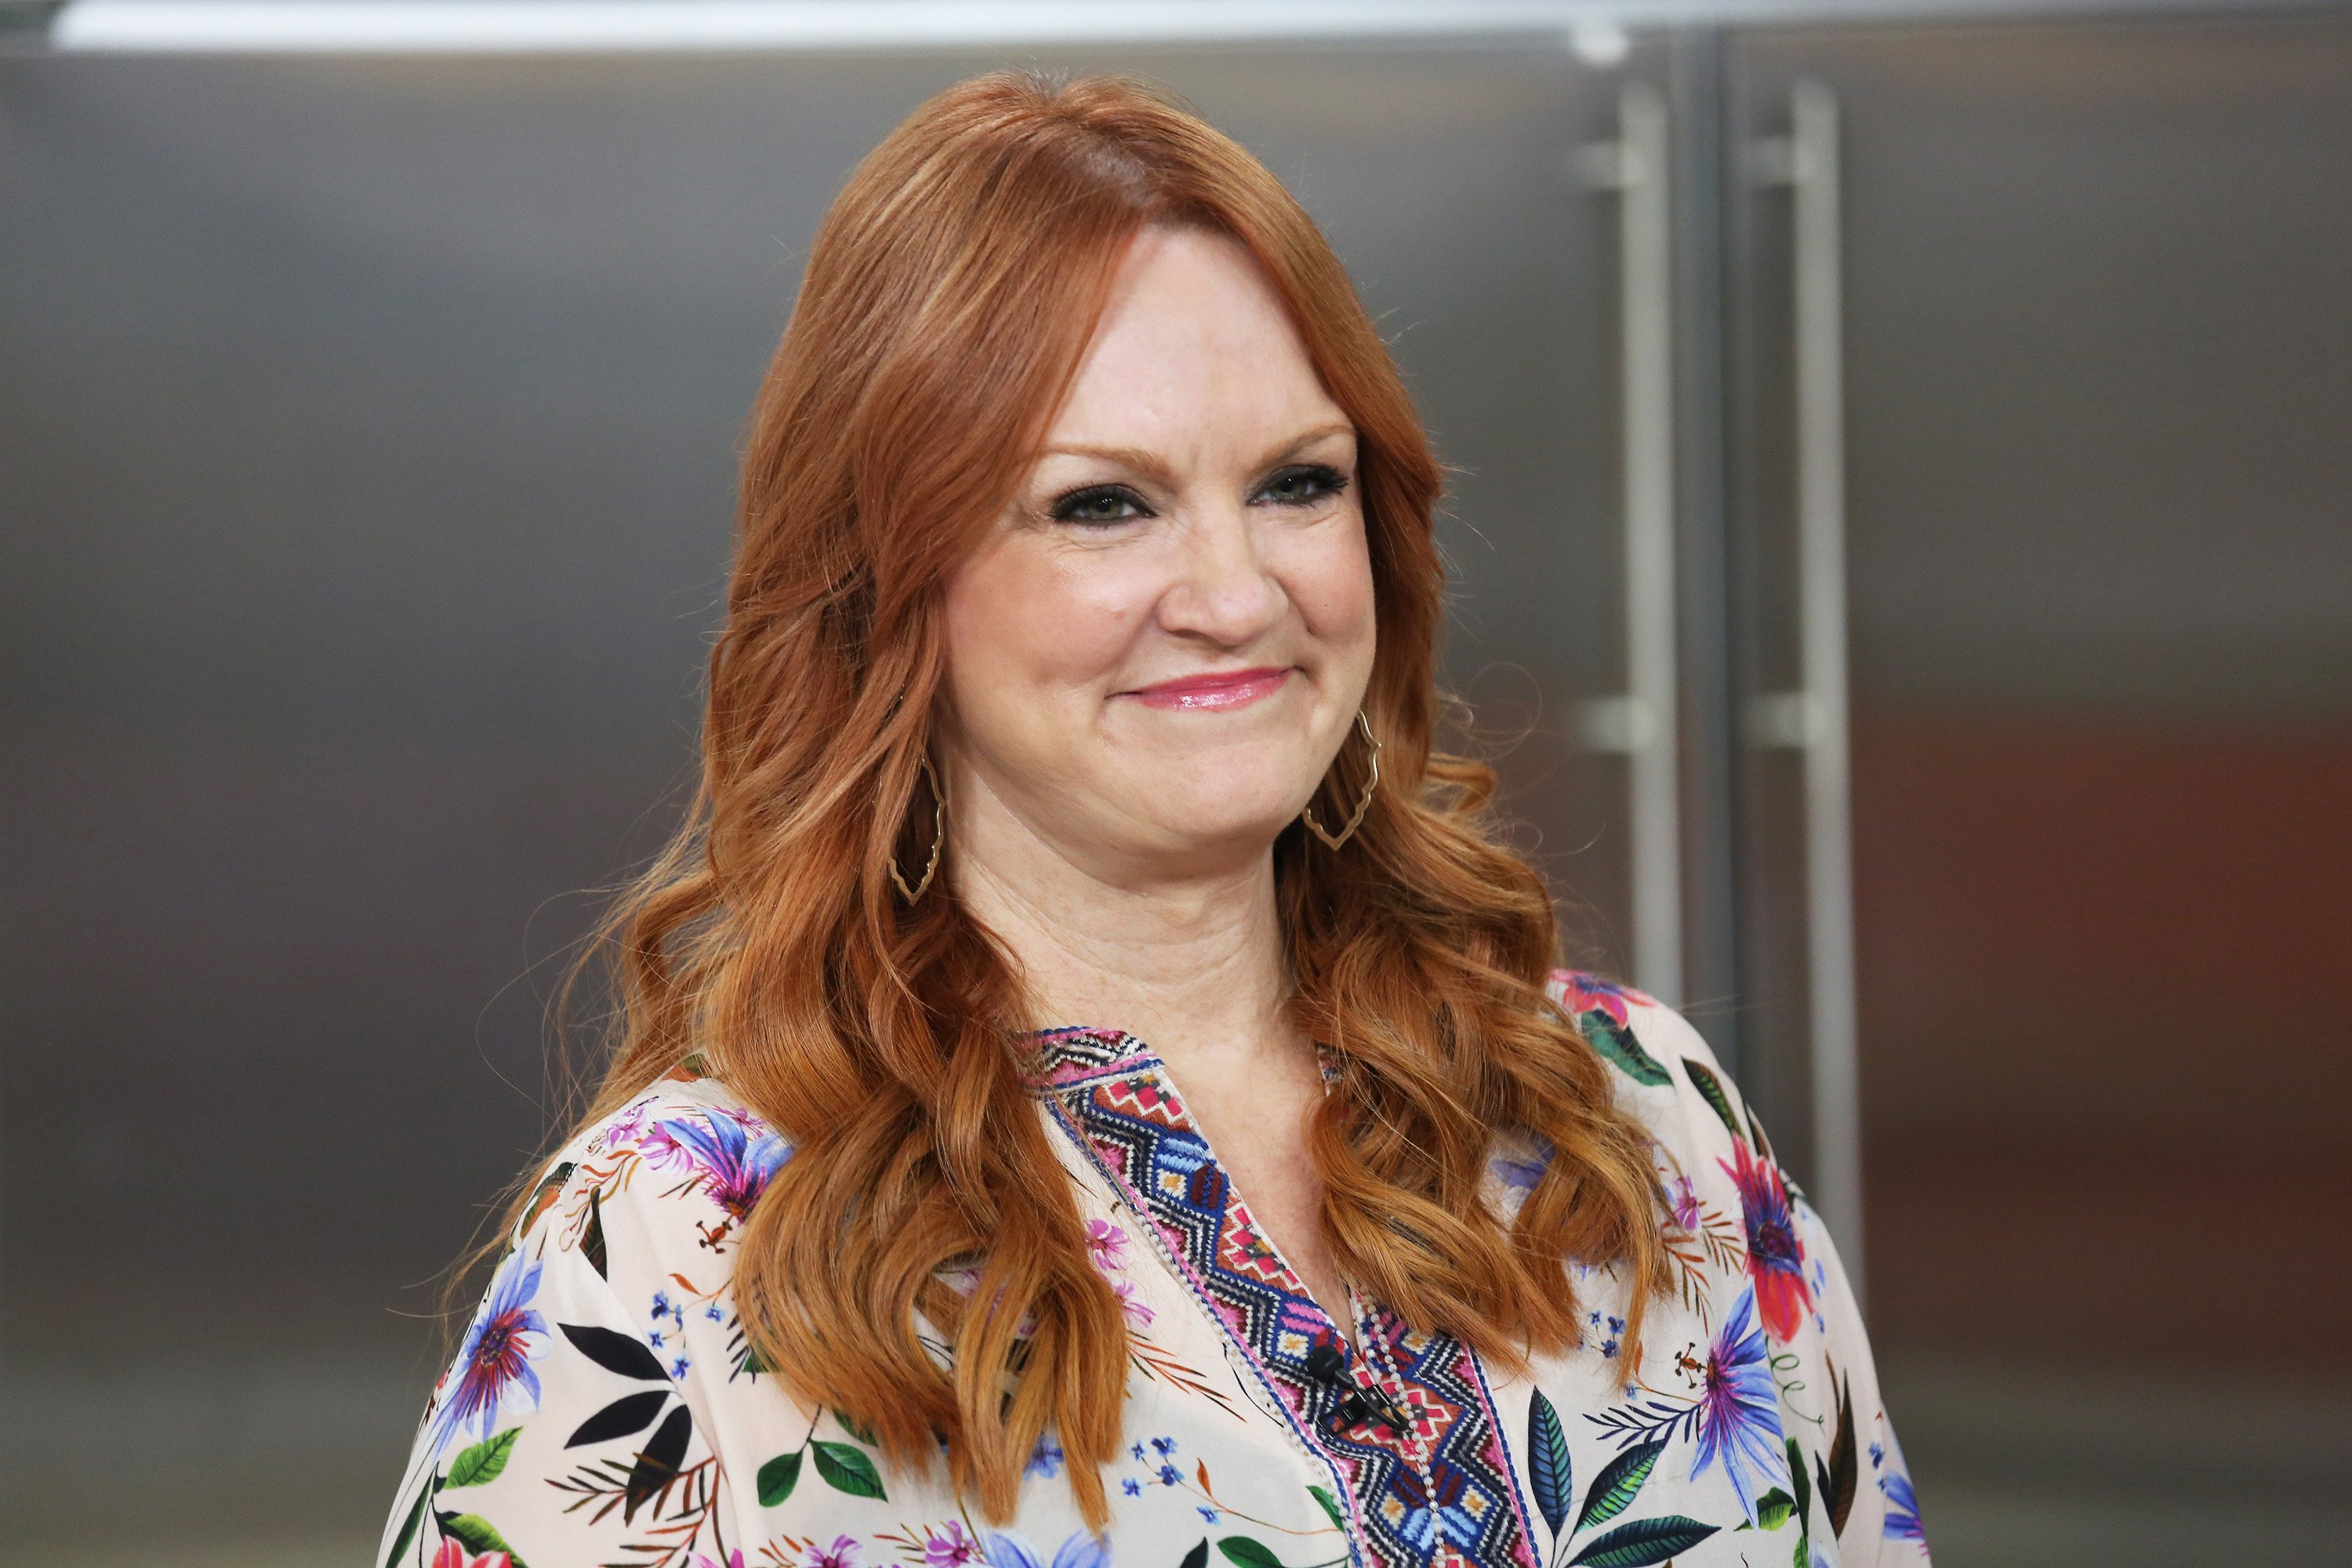 The Pioneer Woman Ree Drummond wears a floral shirt during a cooking demonstration on the Today show. 